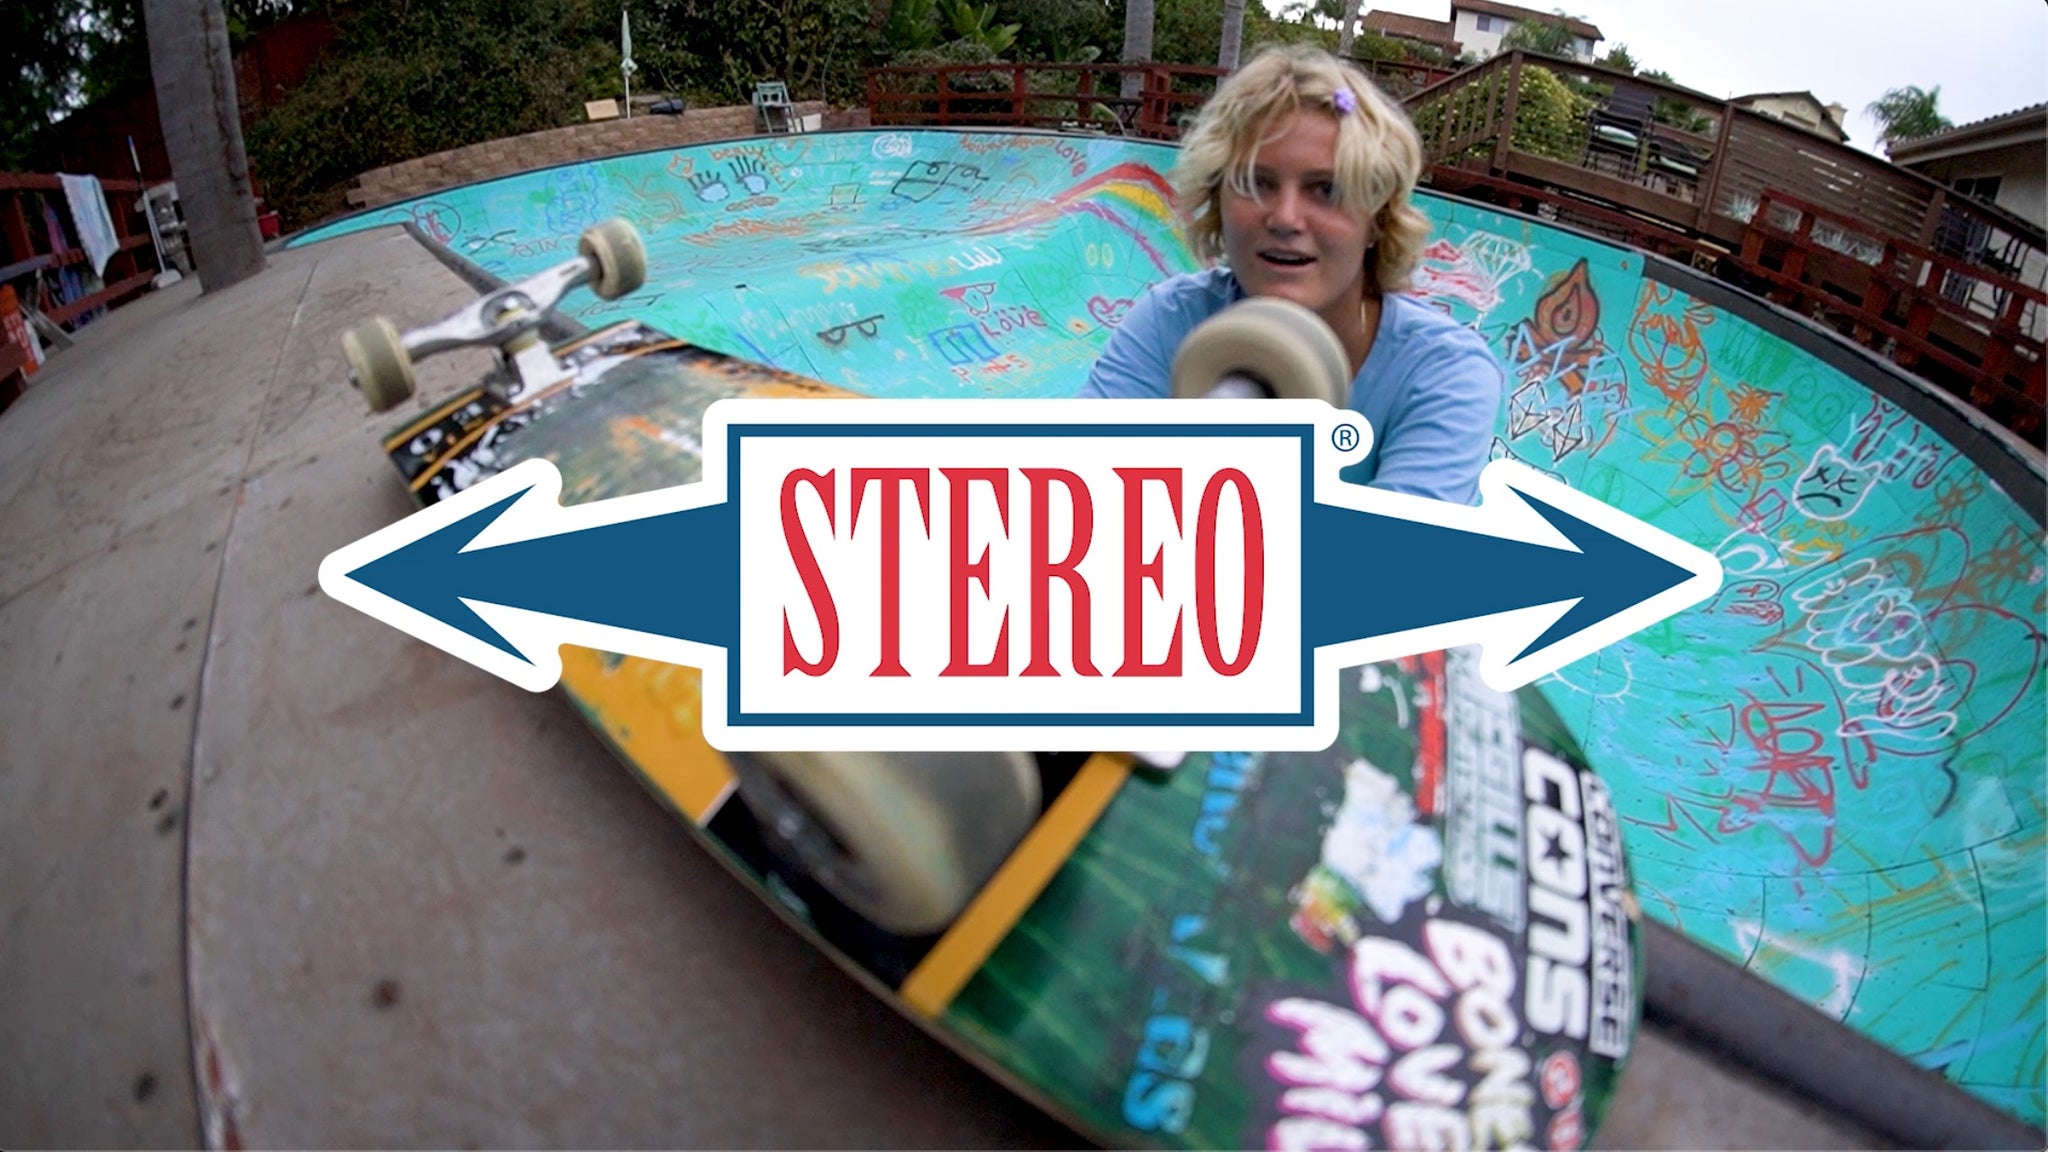 Welcome to Stereo Bryce Wettstein “Stereophonic Debut”